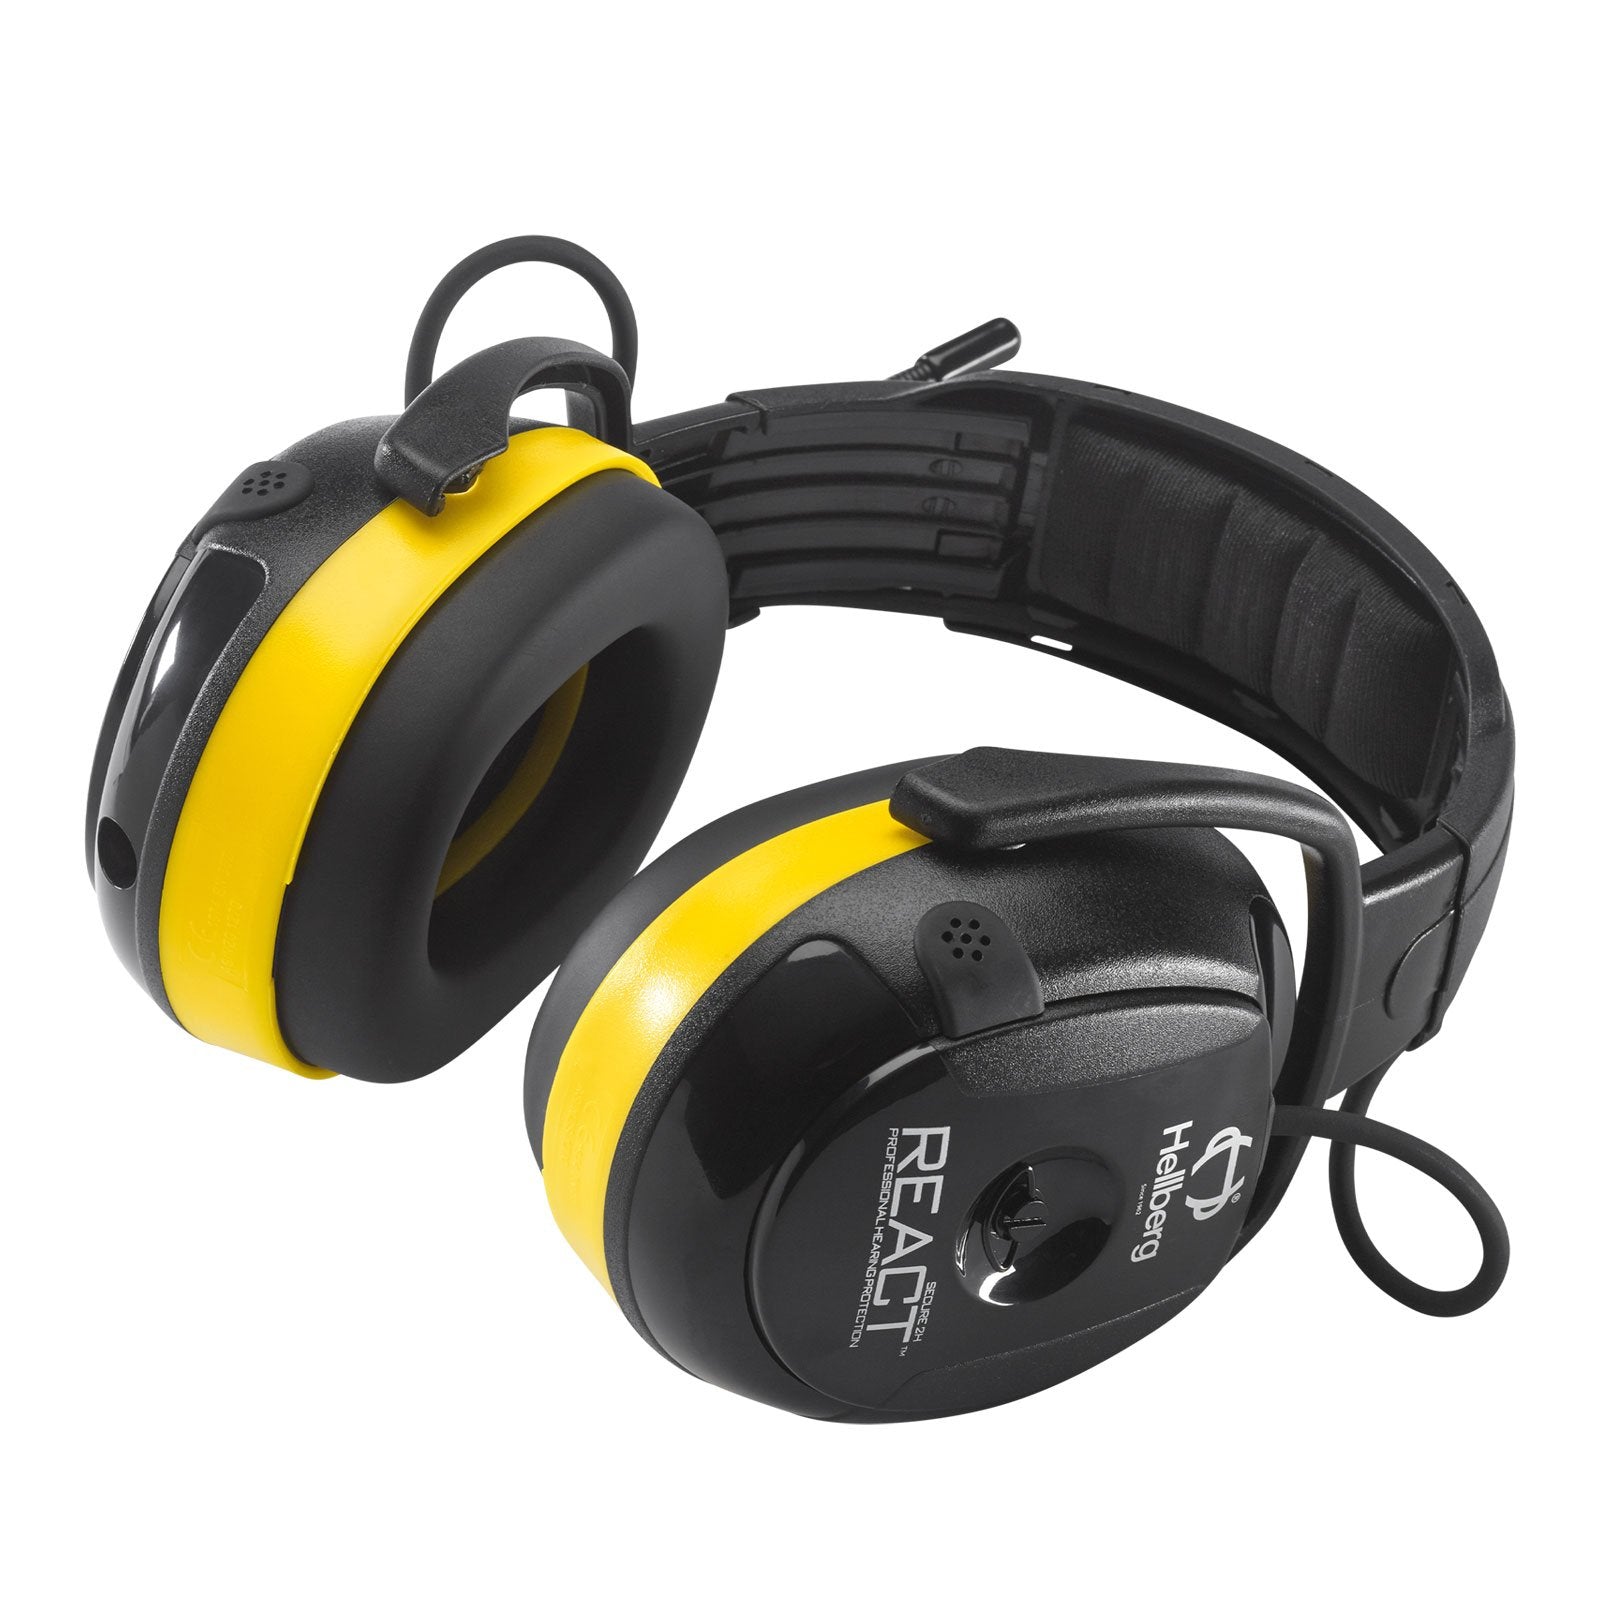 Hellberg Xstream IPX4 48101-001 LD - Casque protection auditive